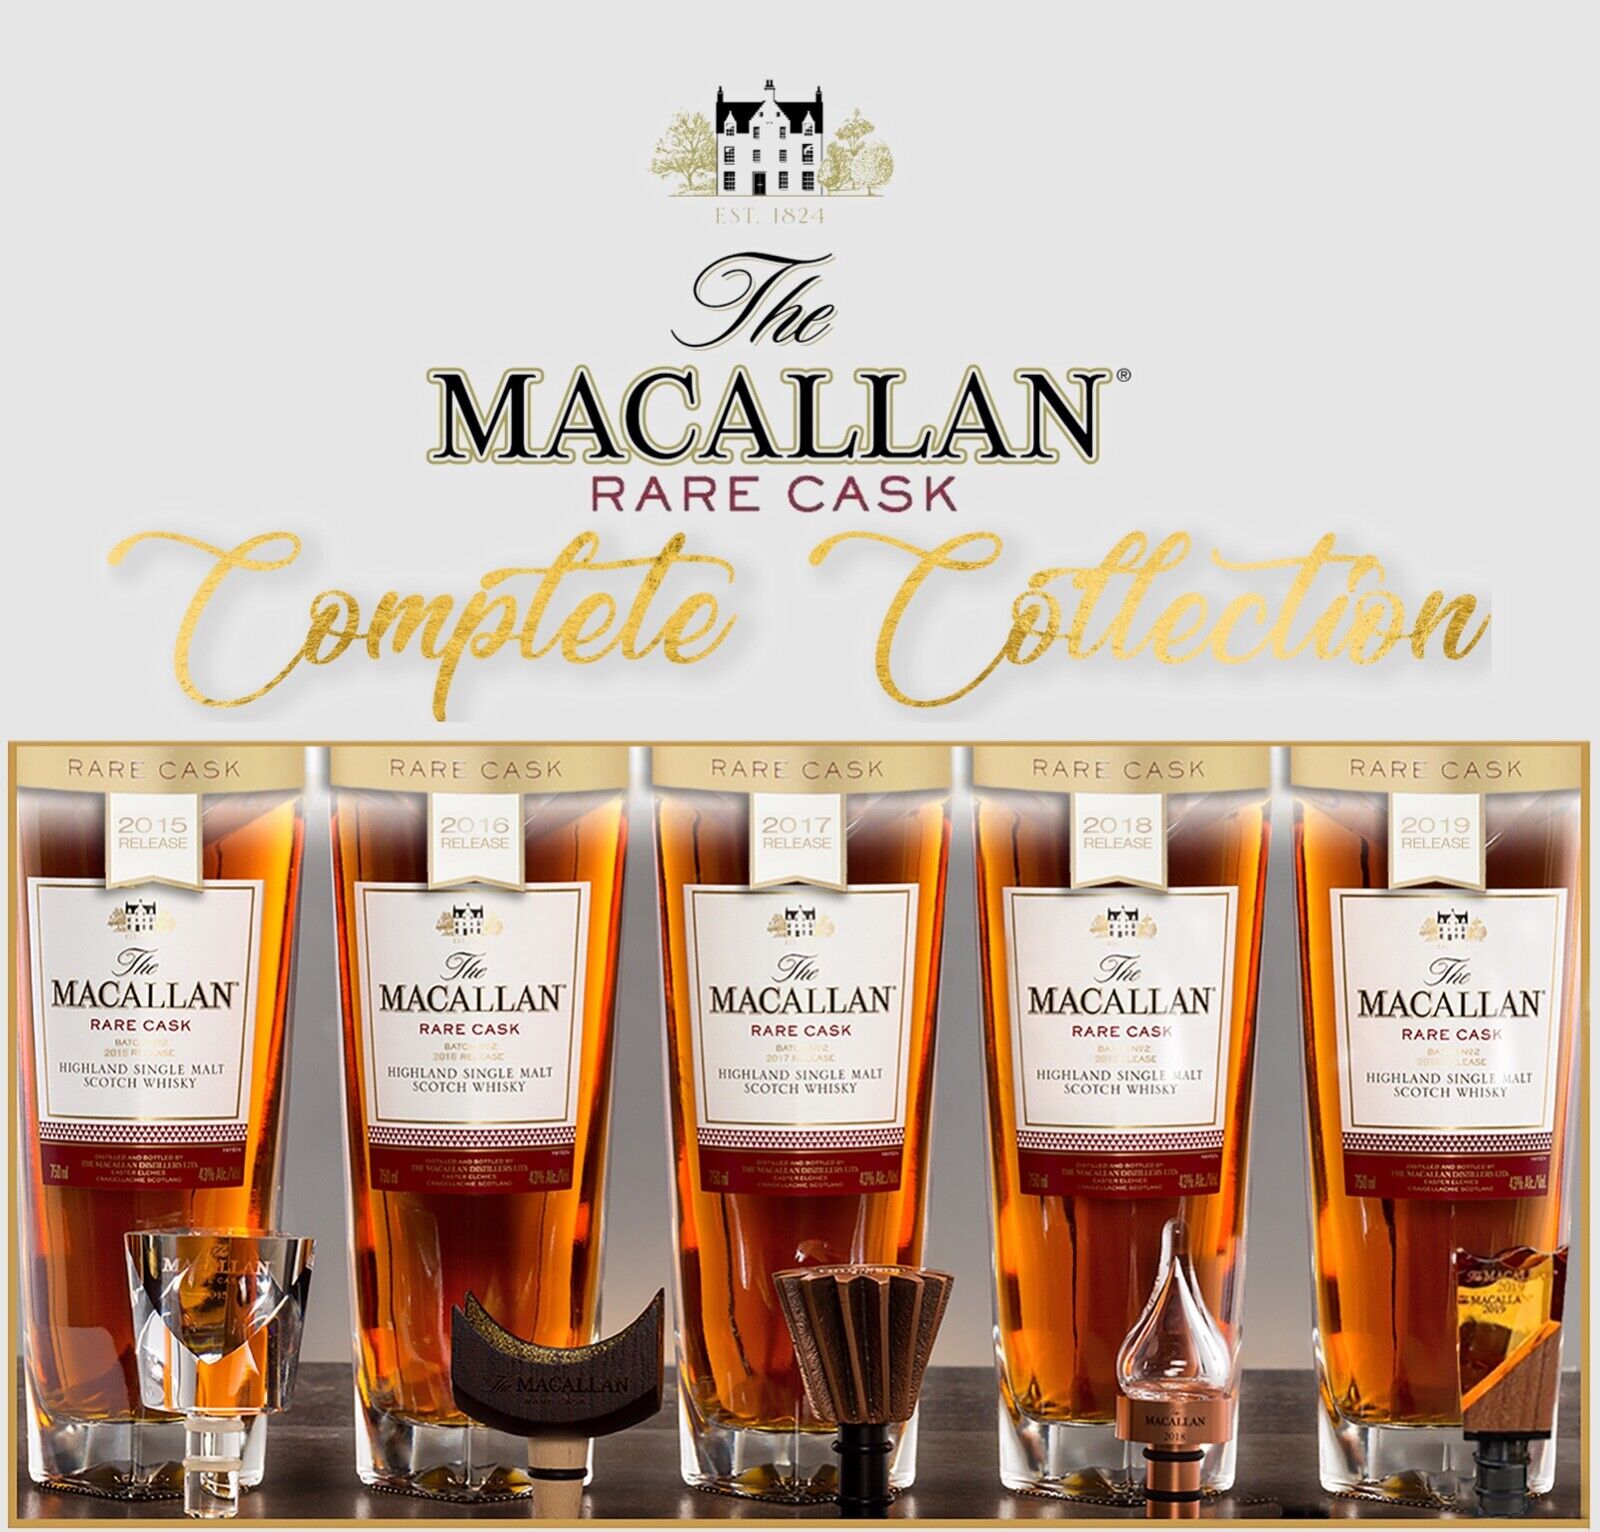 Macallan Rare Cask Bottle Stopper COMPLETE COLLECTION  2015 2016 2017 2018 2019